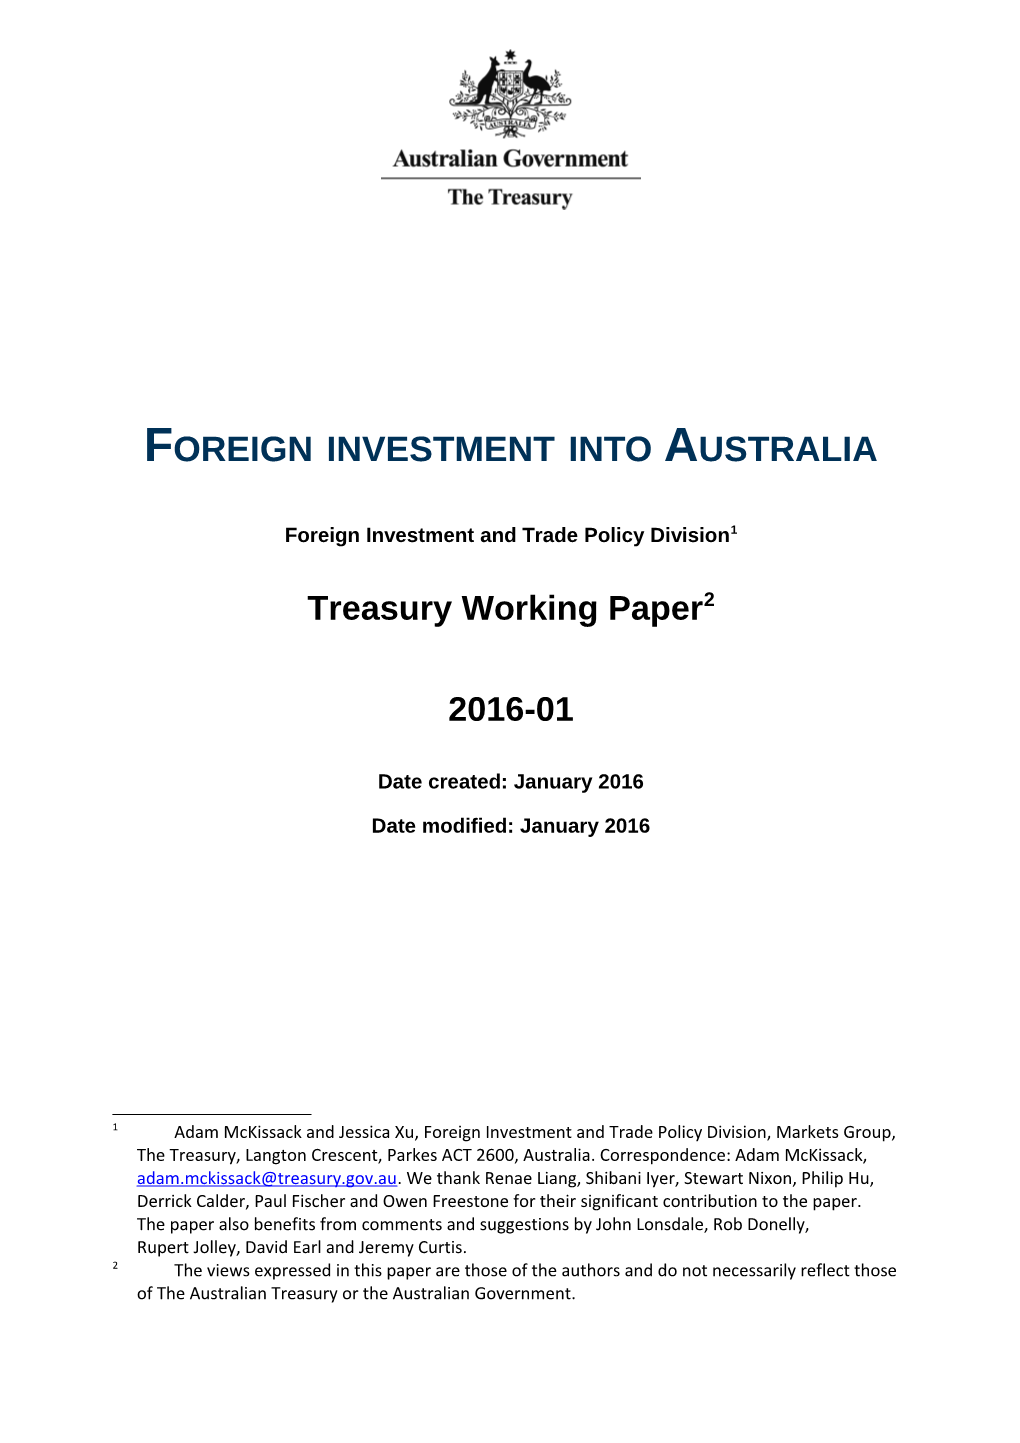 Treasury Working Paper 2016-01 - Foreign Investment Into Australia